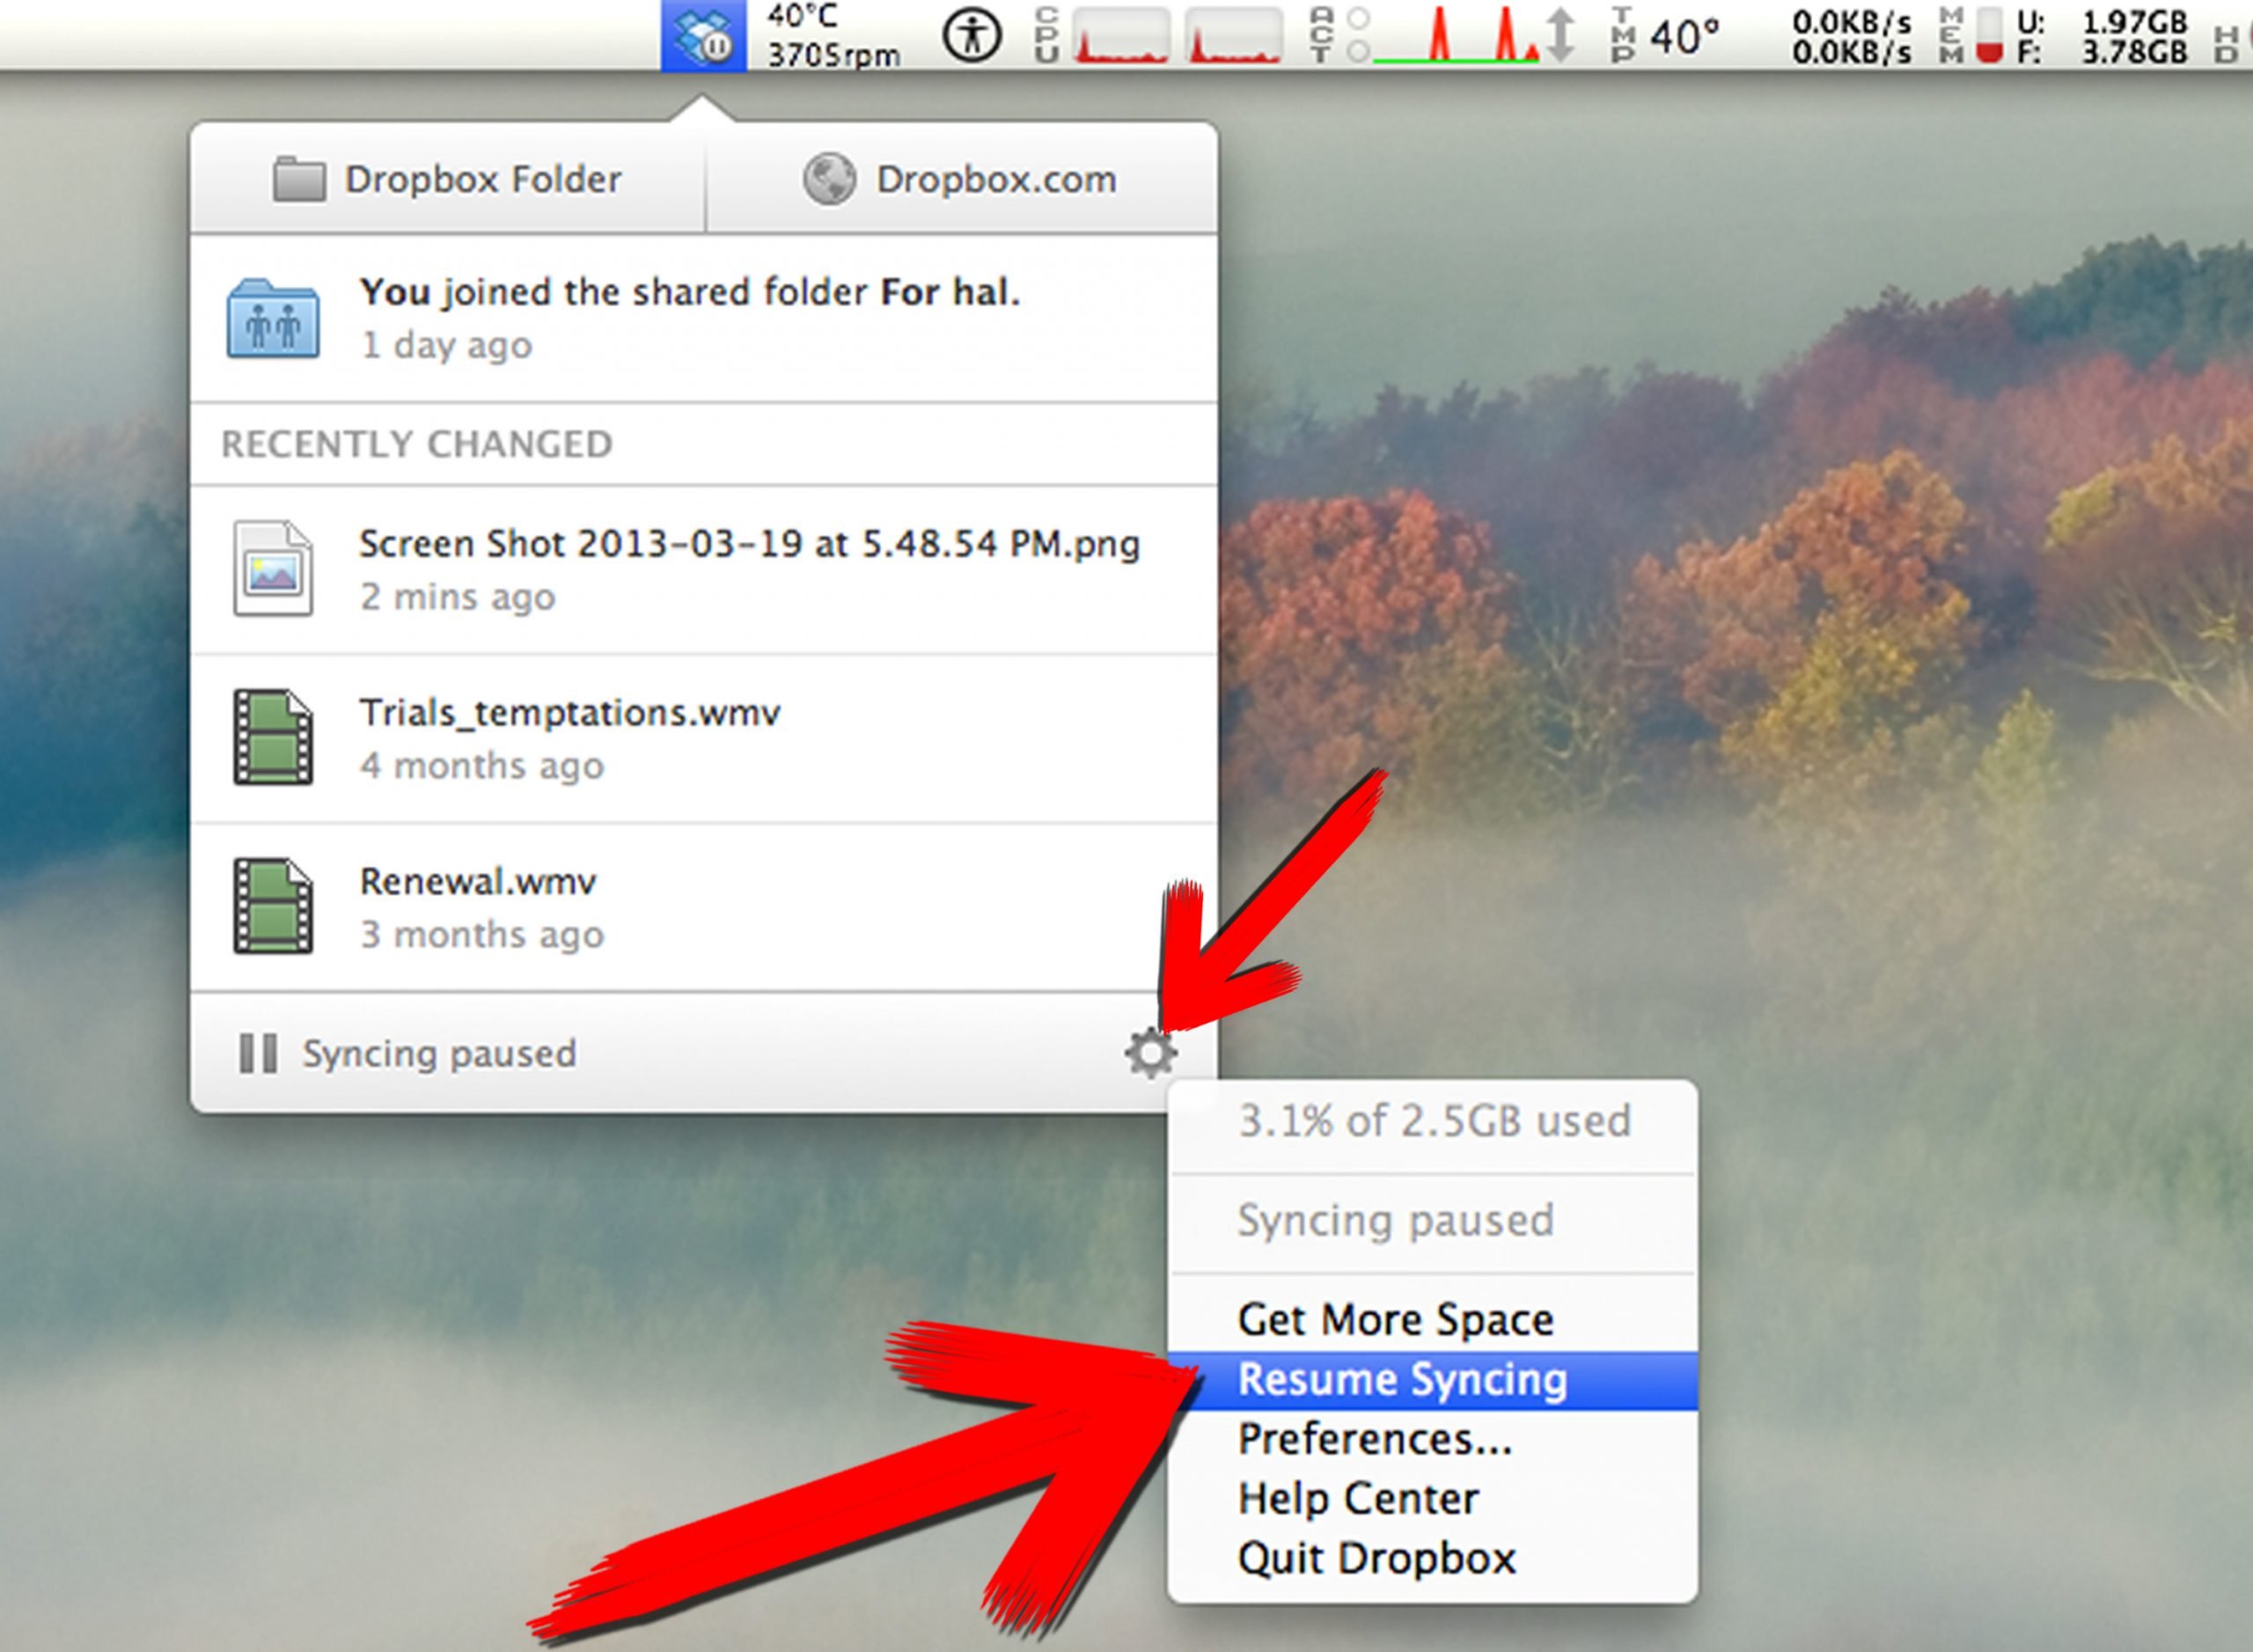 How to Pause and Resume Syncing on Dropbox: 6 Steps